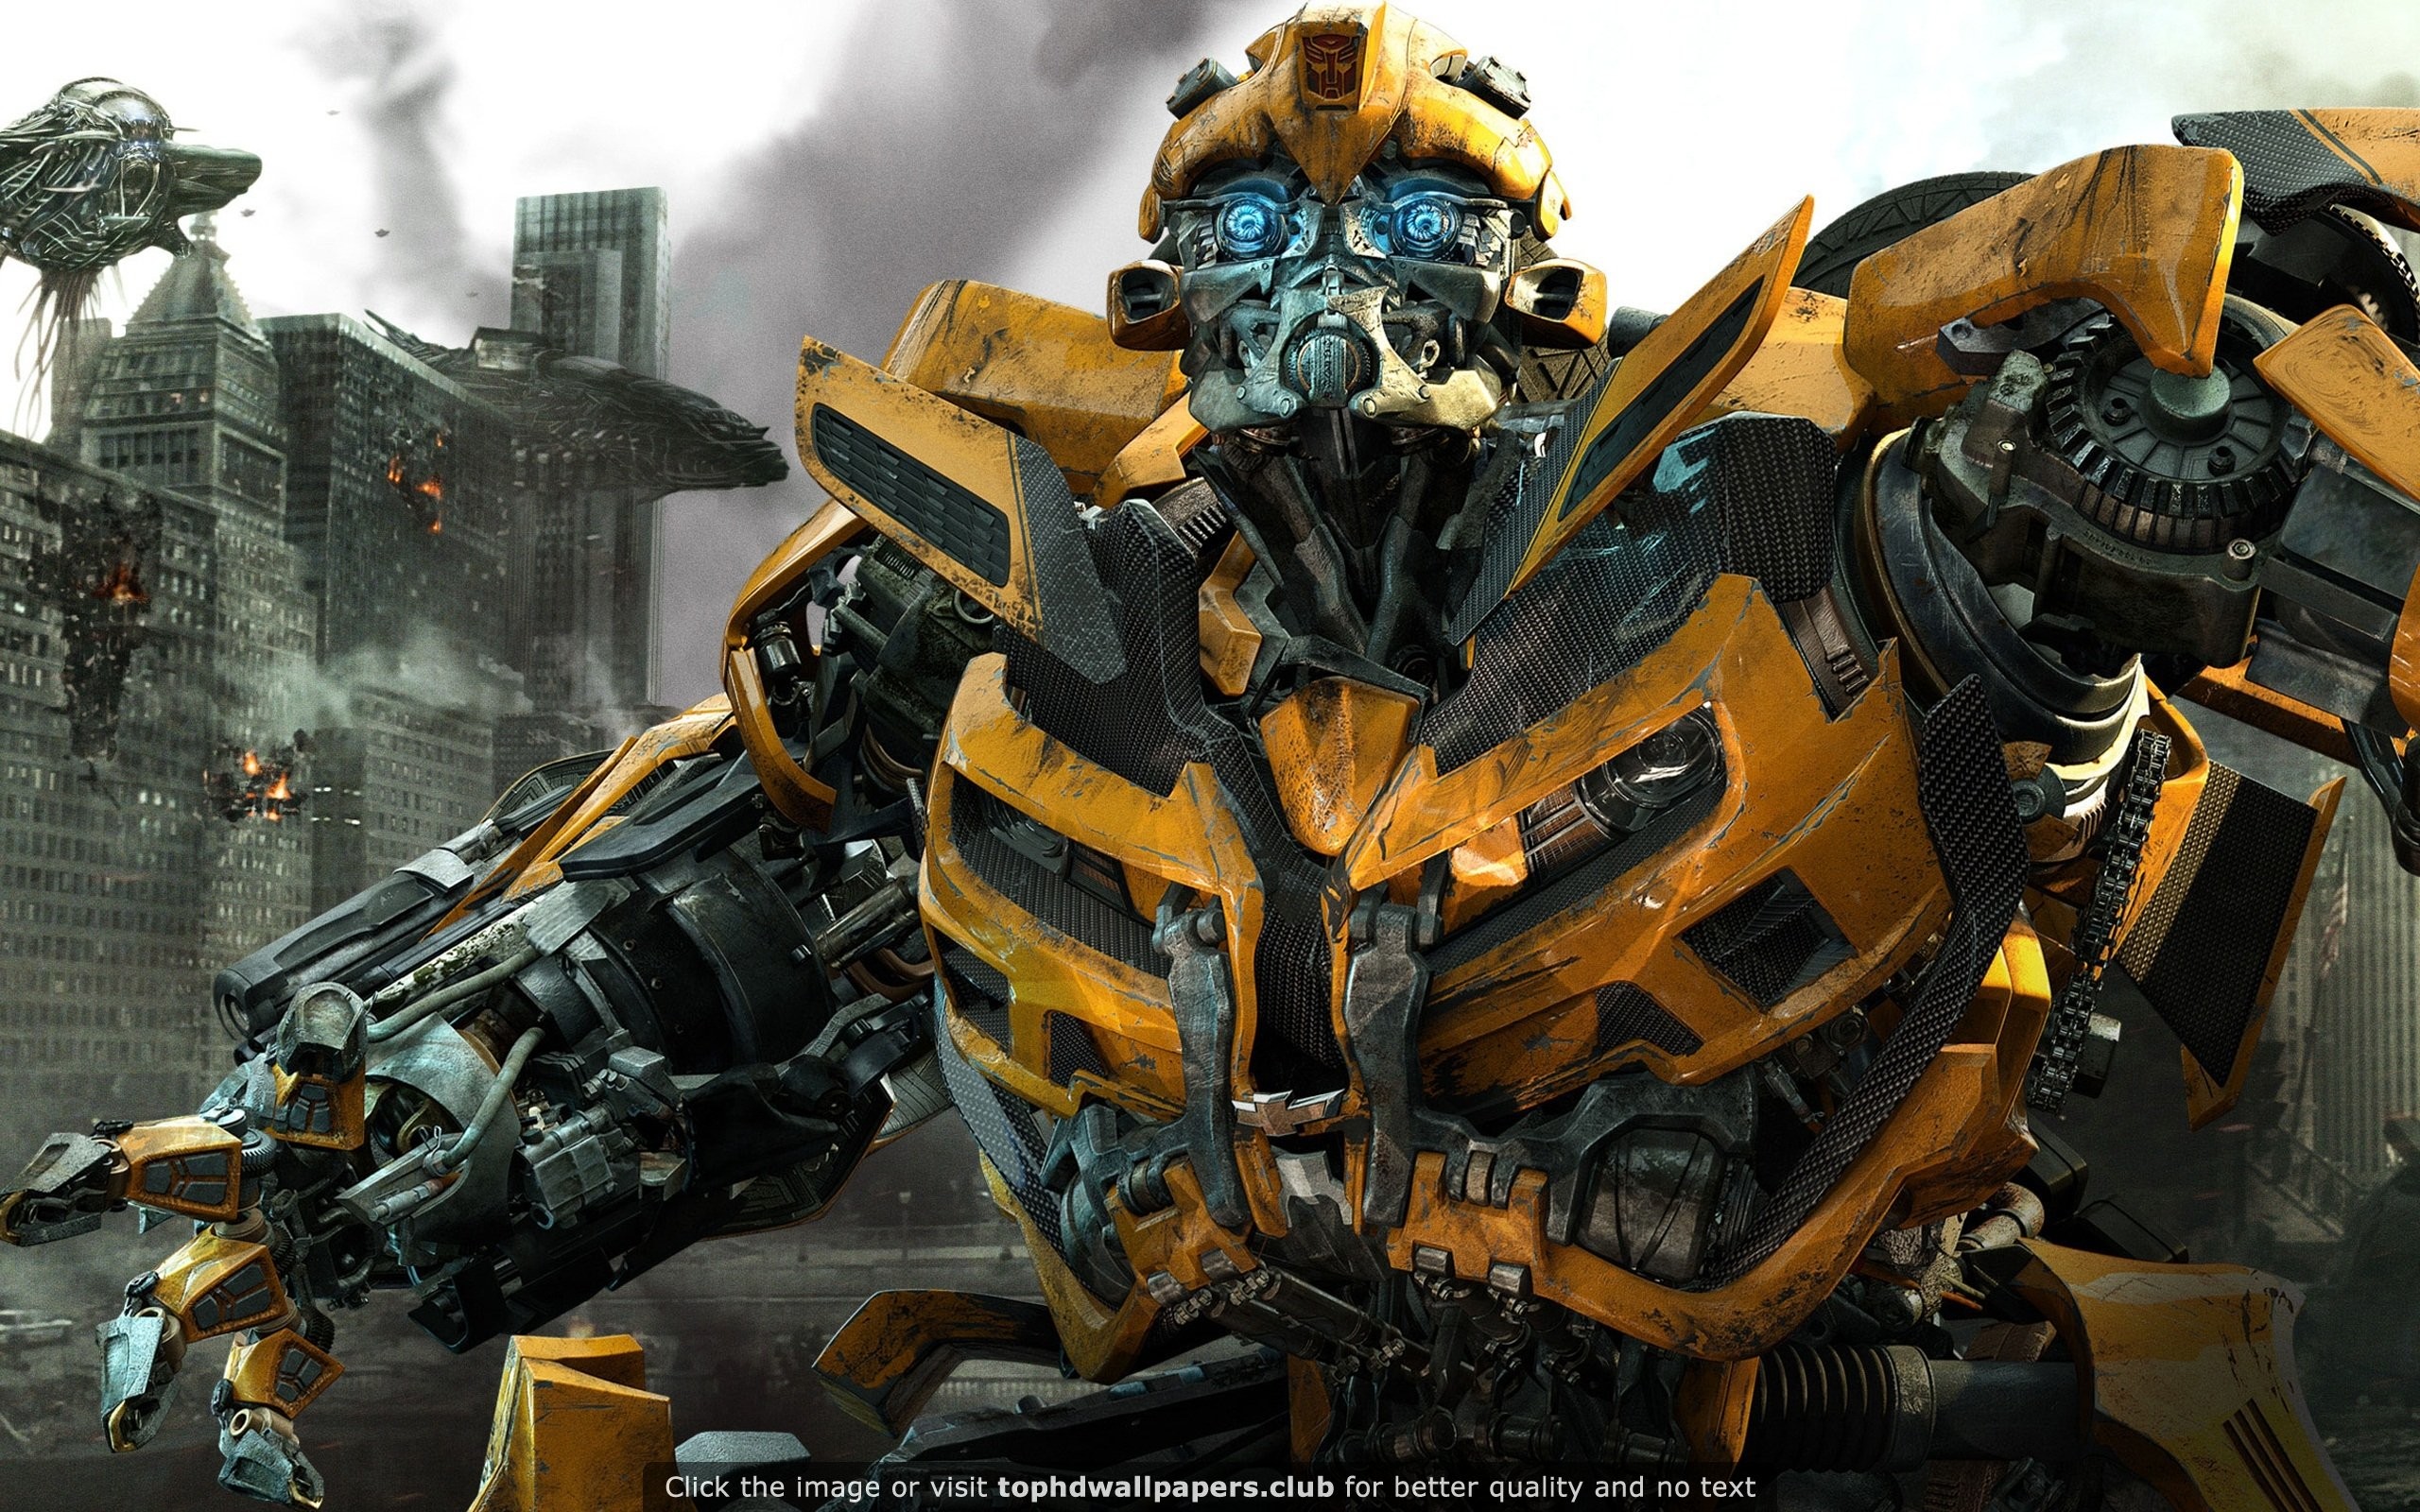 2560x1600 Bumblebee in Transformers 3 HD wallpaper for your PC, Mac or Mobile device